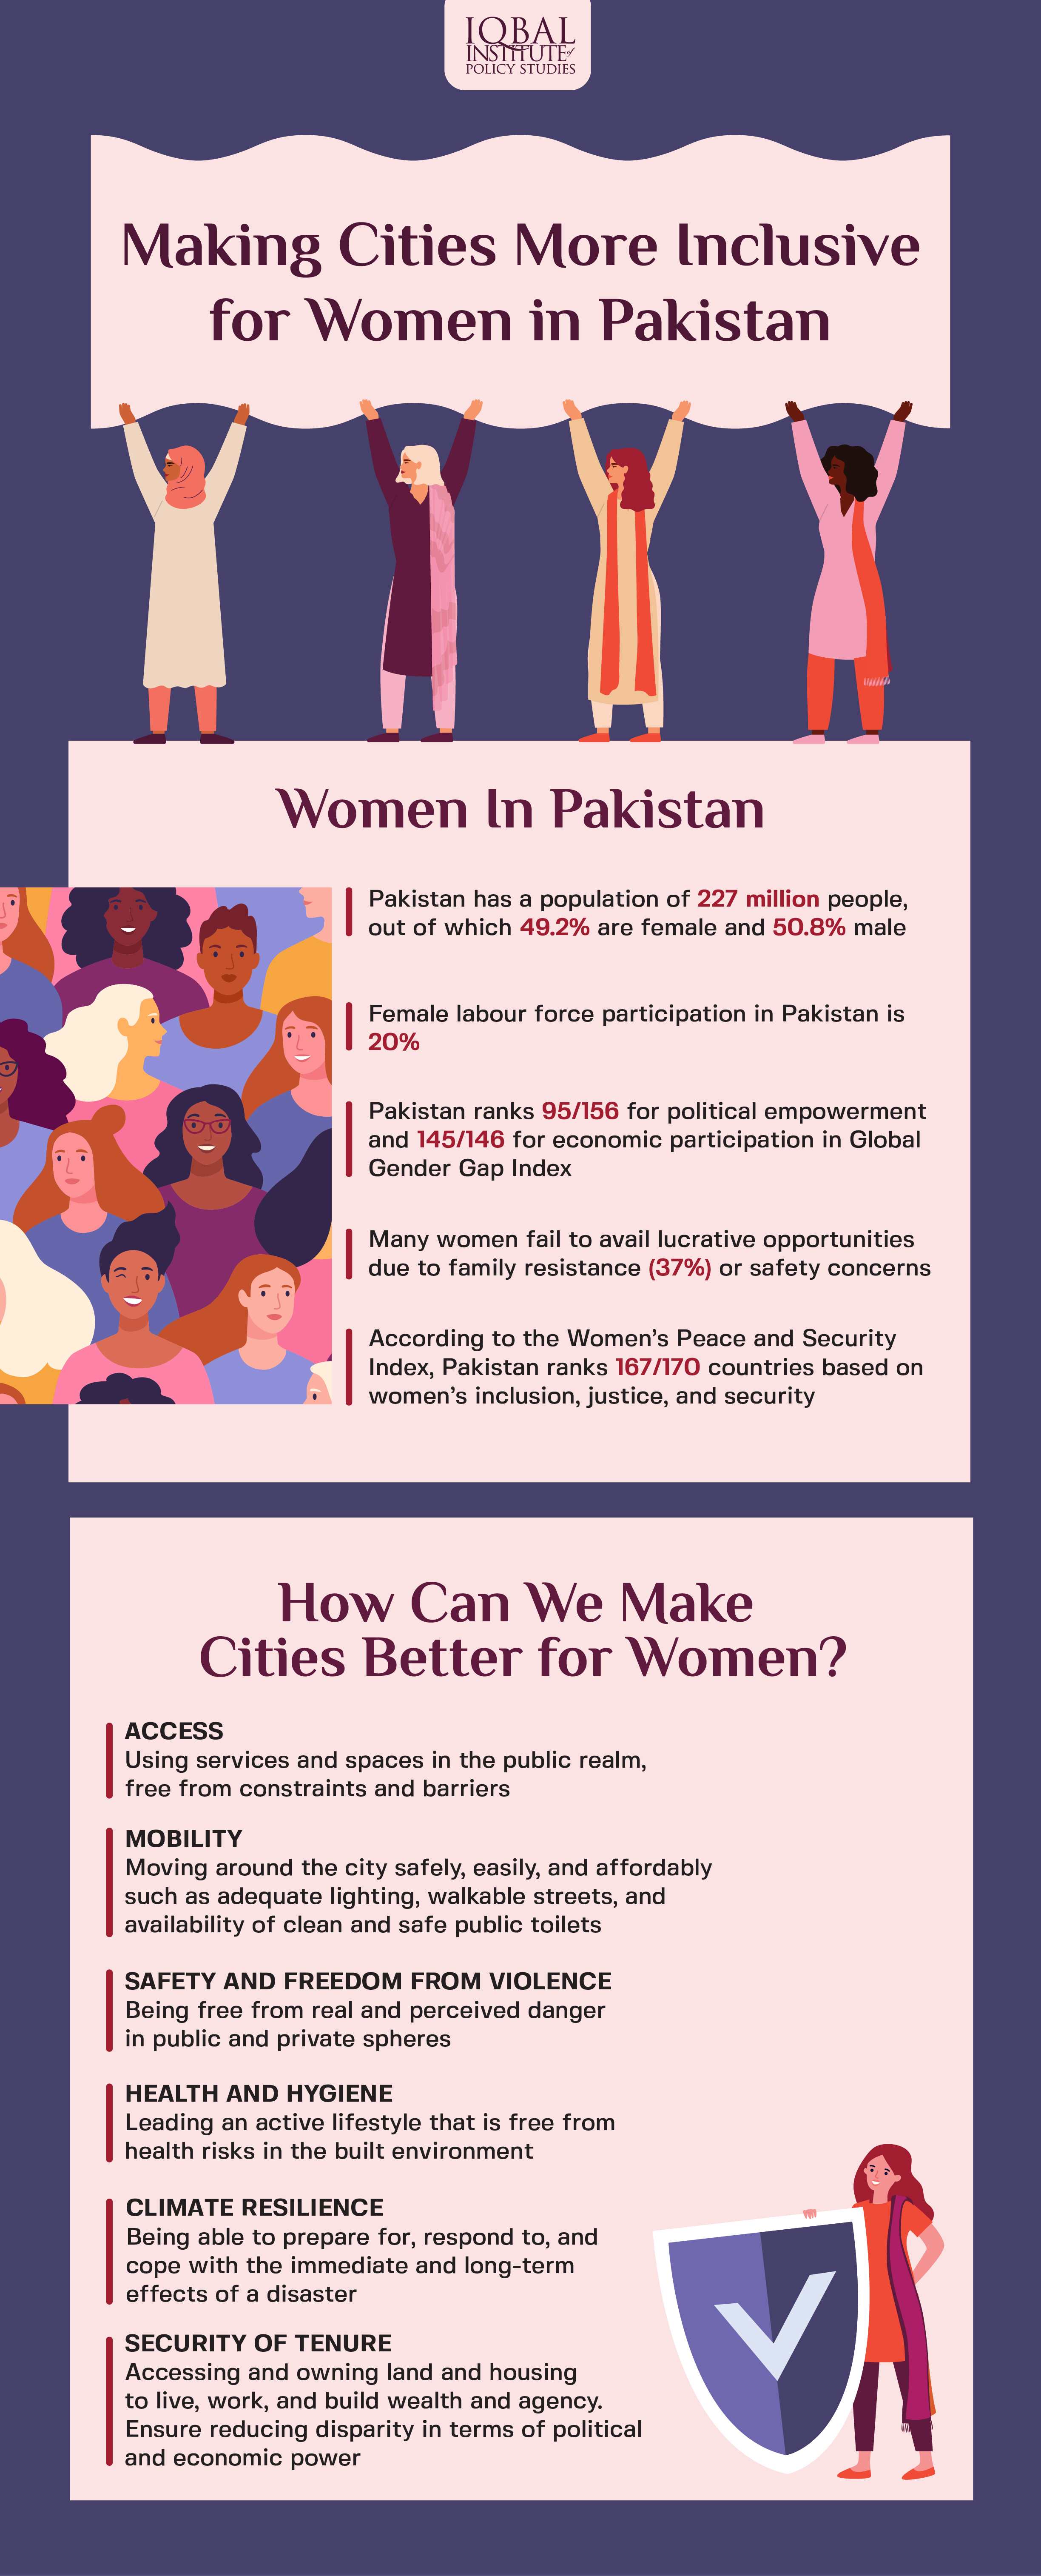 Making Cities more inclusive for women in Pakistan